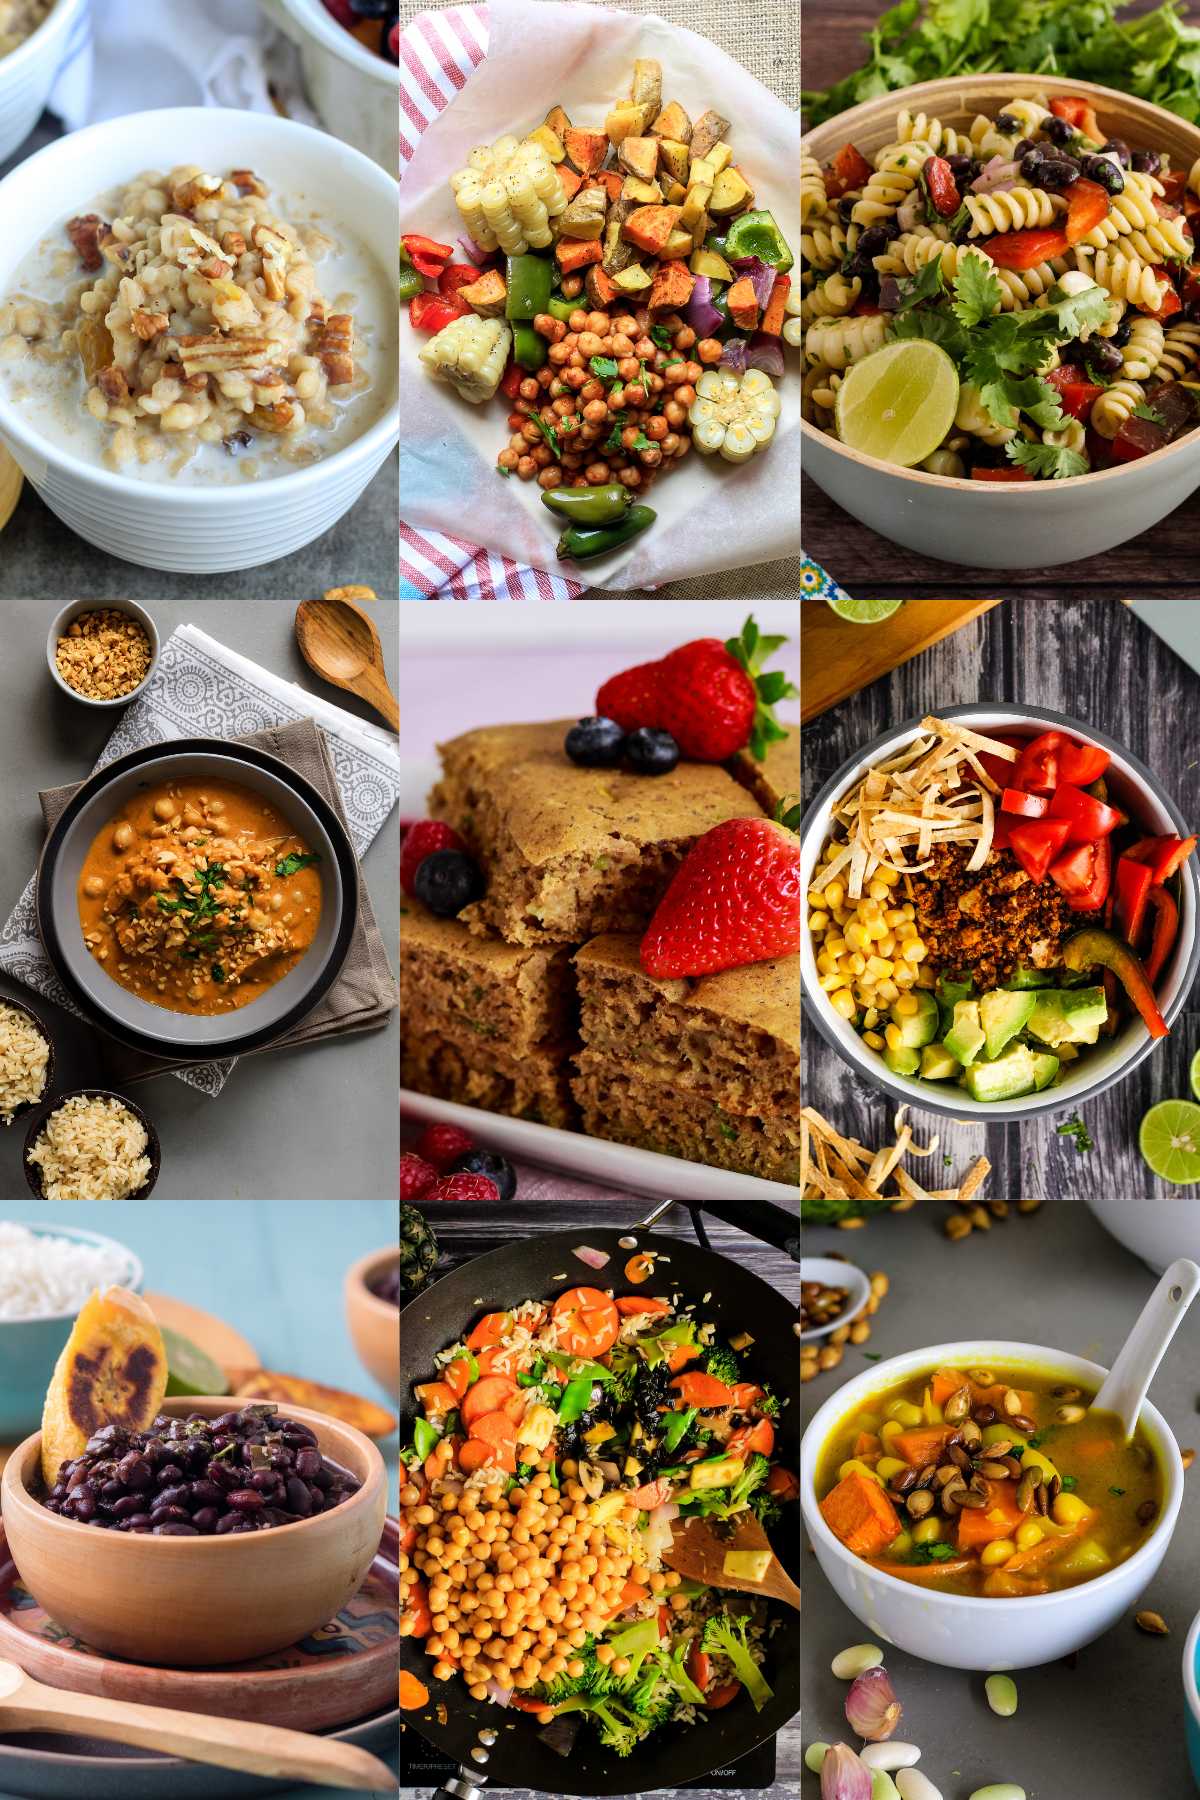 A collage of images showing different plant-based meal prep meals.